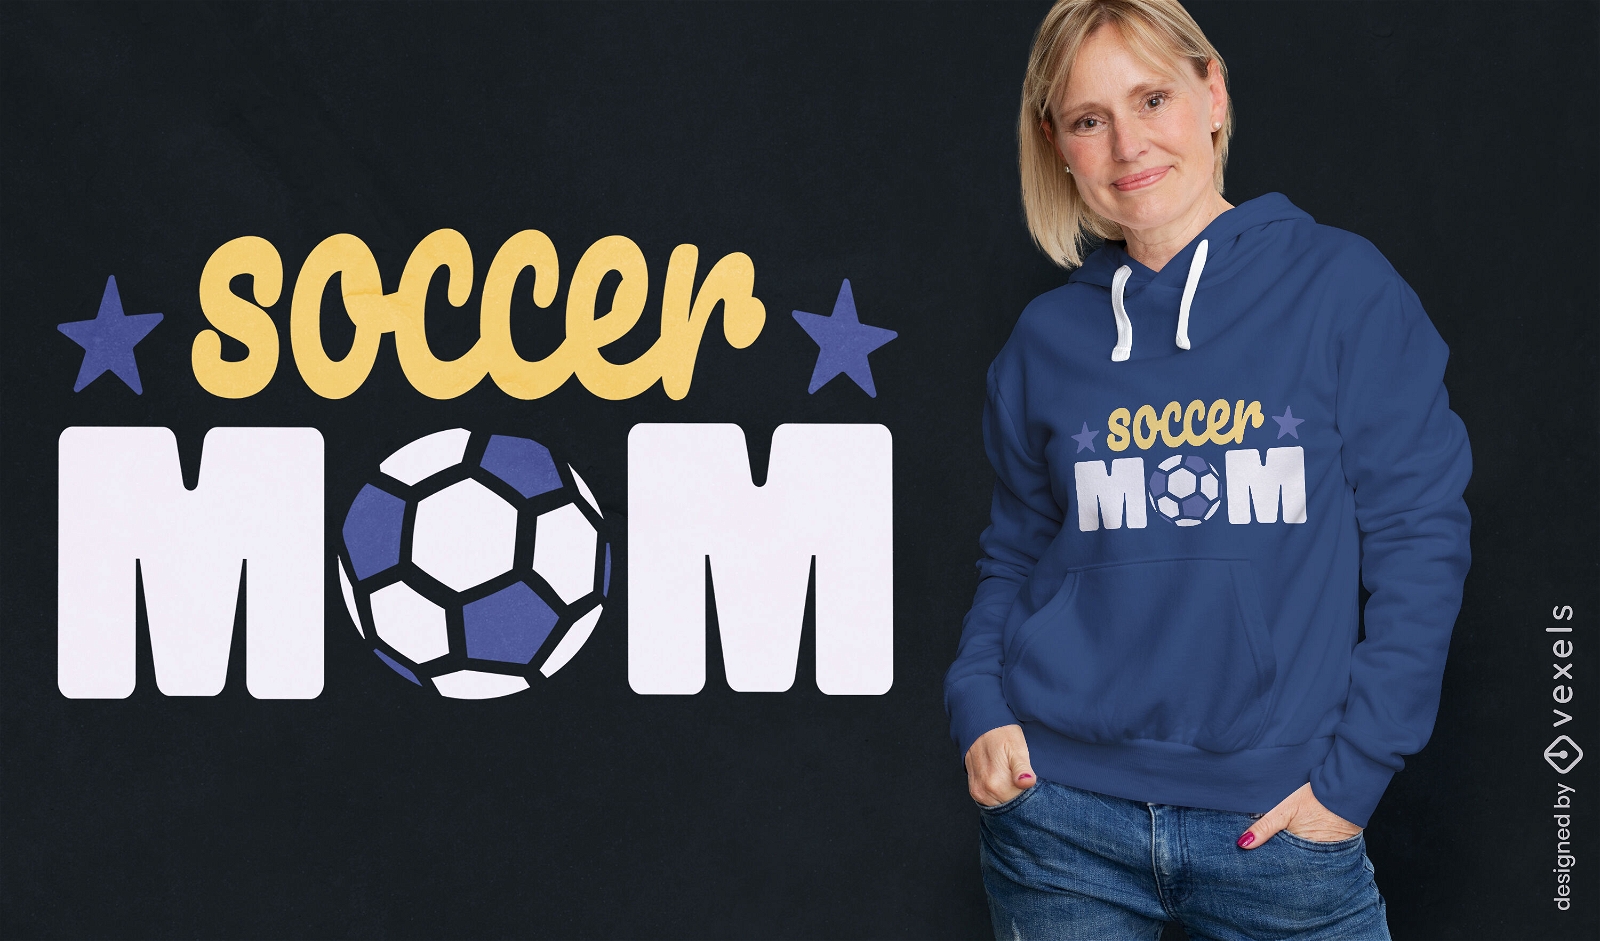 Soccer mom quote with stars t-shirt design